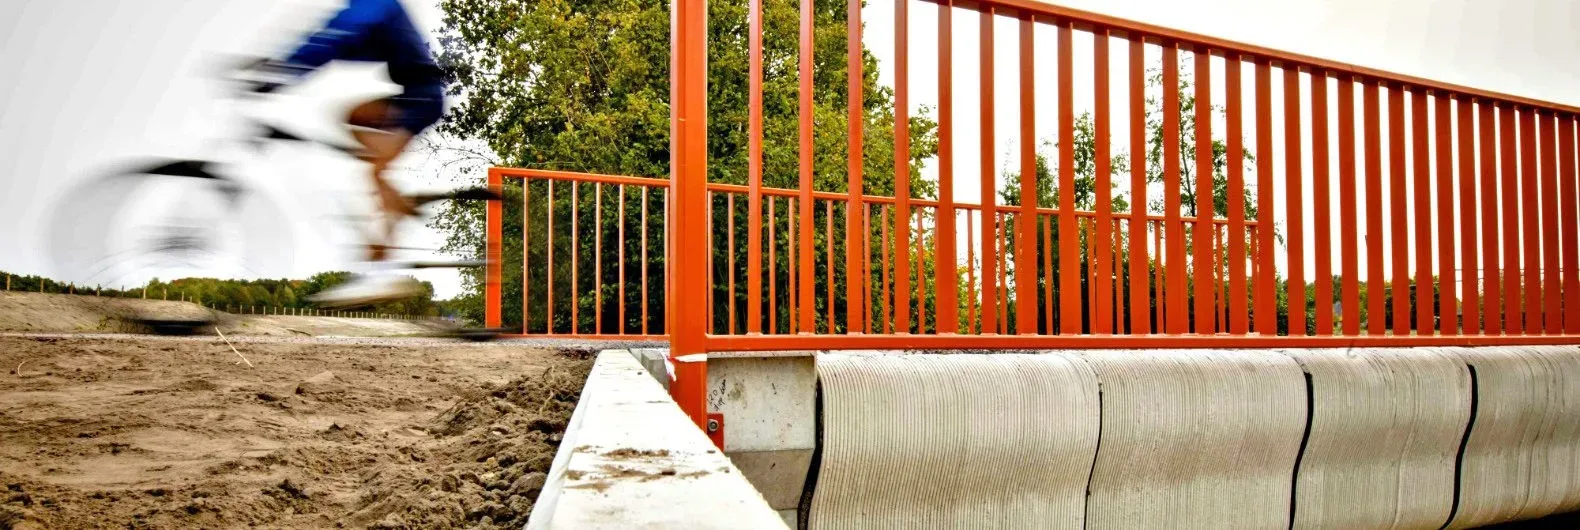 worlds first 3d printed bridge opens in The Netherlands lead 1580x530 jpg webp